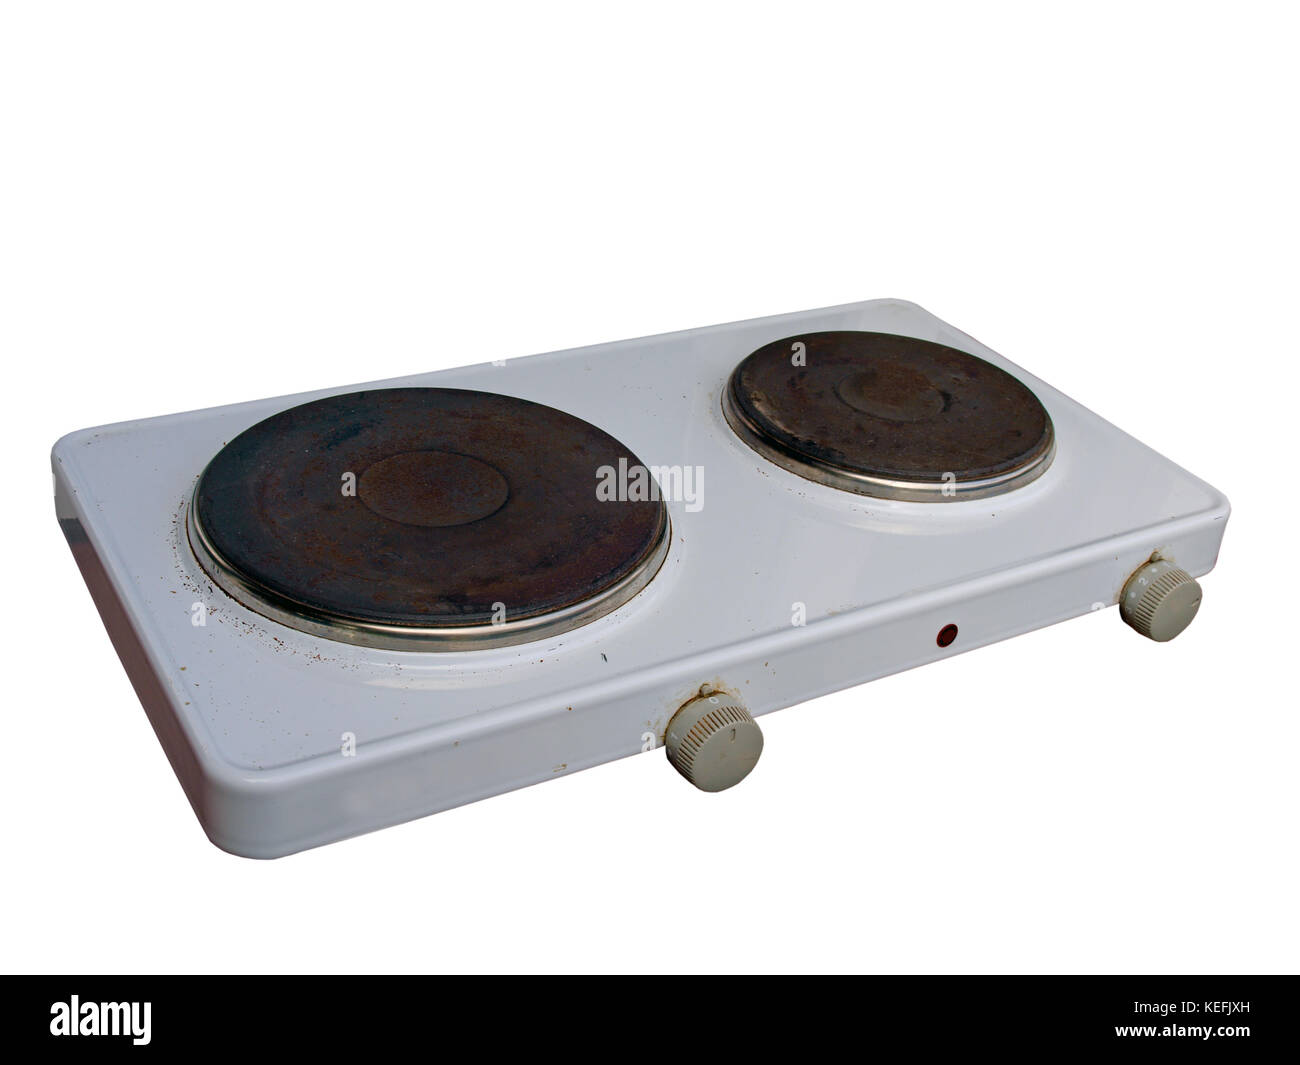 Single Burner Hot Plate For Cooking Cutout Portable Cooktop Isolated On A  White Background Compact Electric Stove With Temperature Control Knob  Electrical Appliances Concept Stock Photo - Download Image Now - iStock